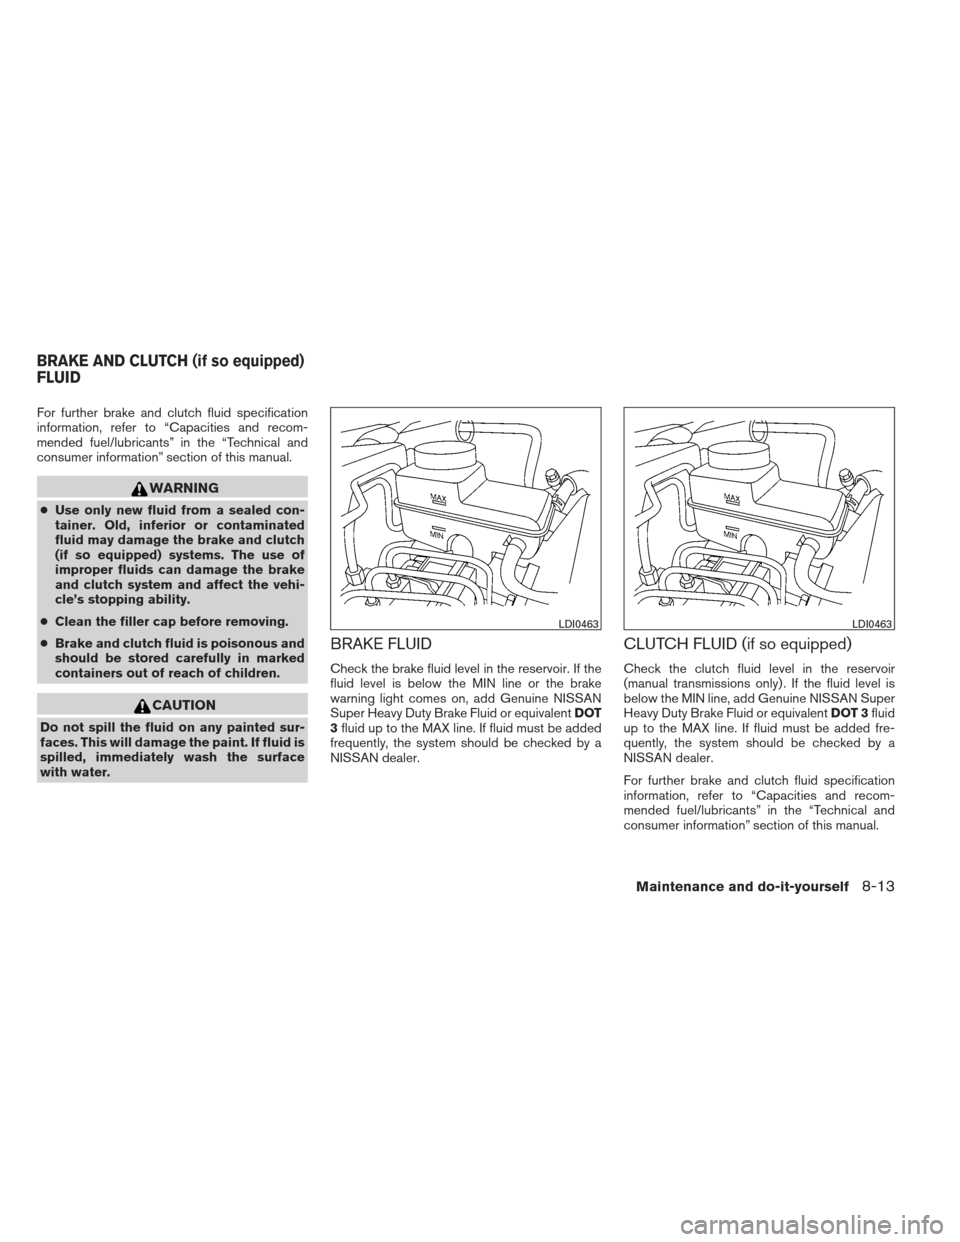 NISSAN XTERRA 2013 N50 / 2.G Owners Manual For further brake and clutch fluid specification
information, refer to “Capacities and recom-
mended fuel/lubricants” in the “Technical and
consumer information” section of this manual.
WARNIN